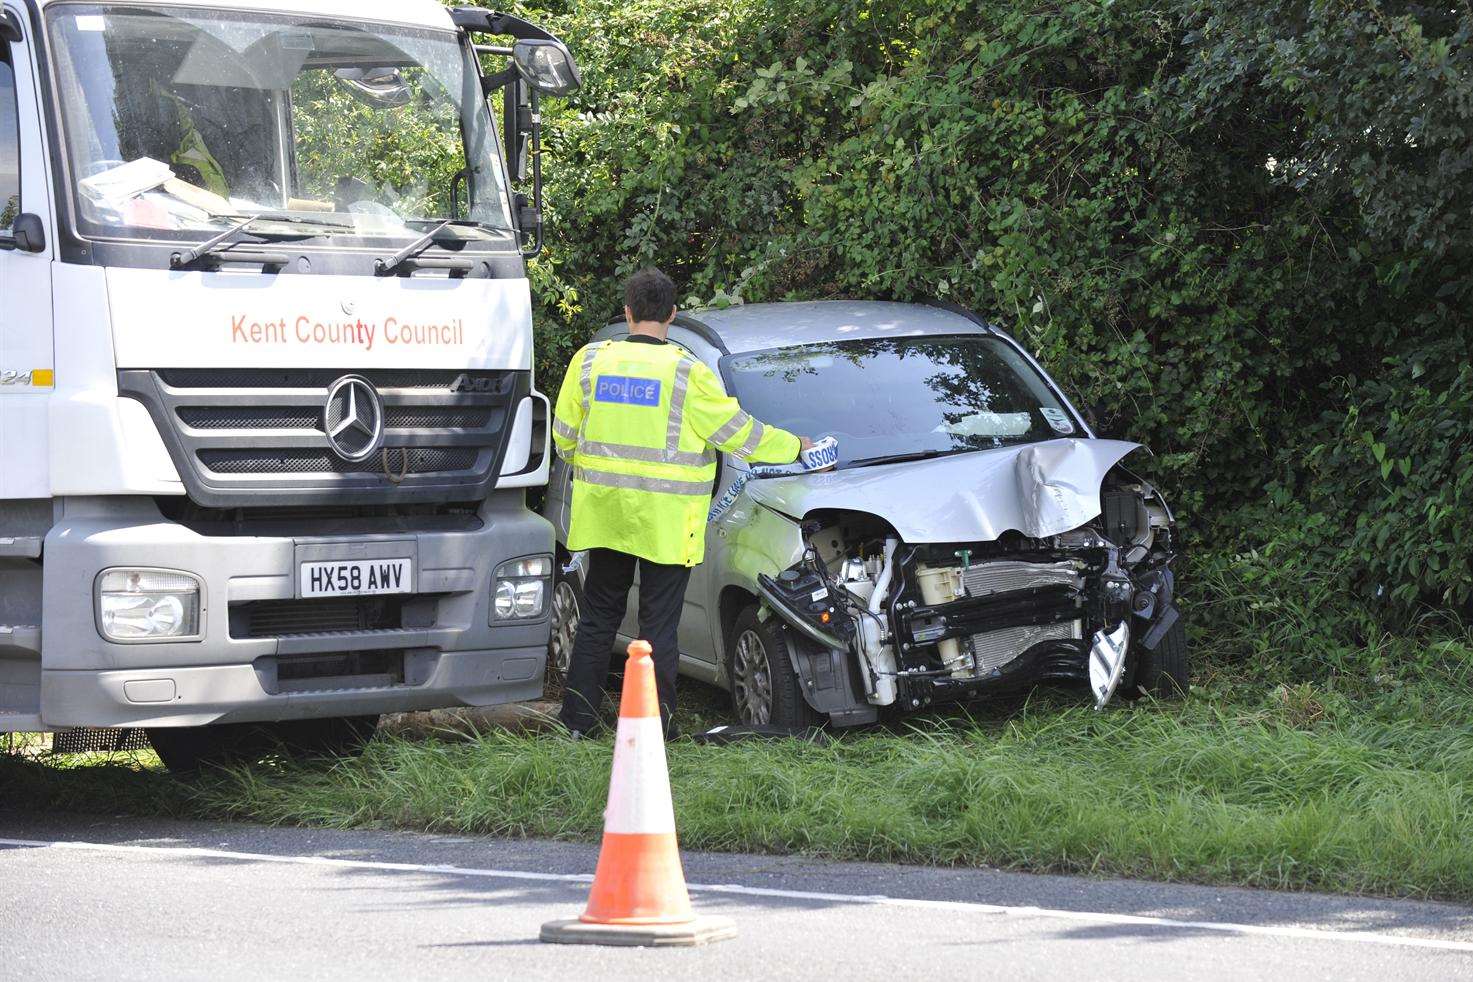 A woman in her 40s was taken to hospital after the crash